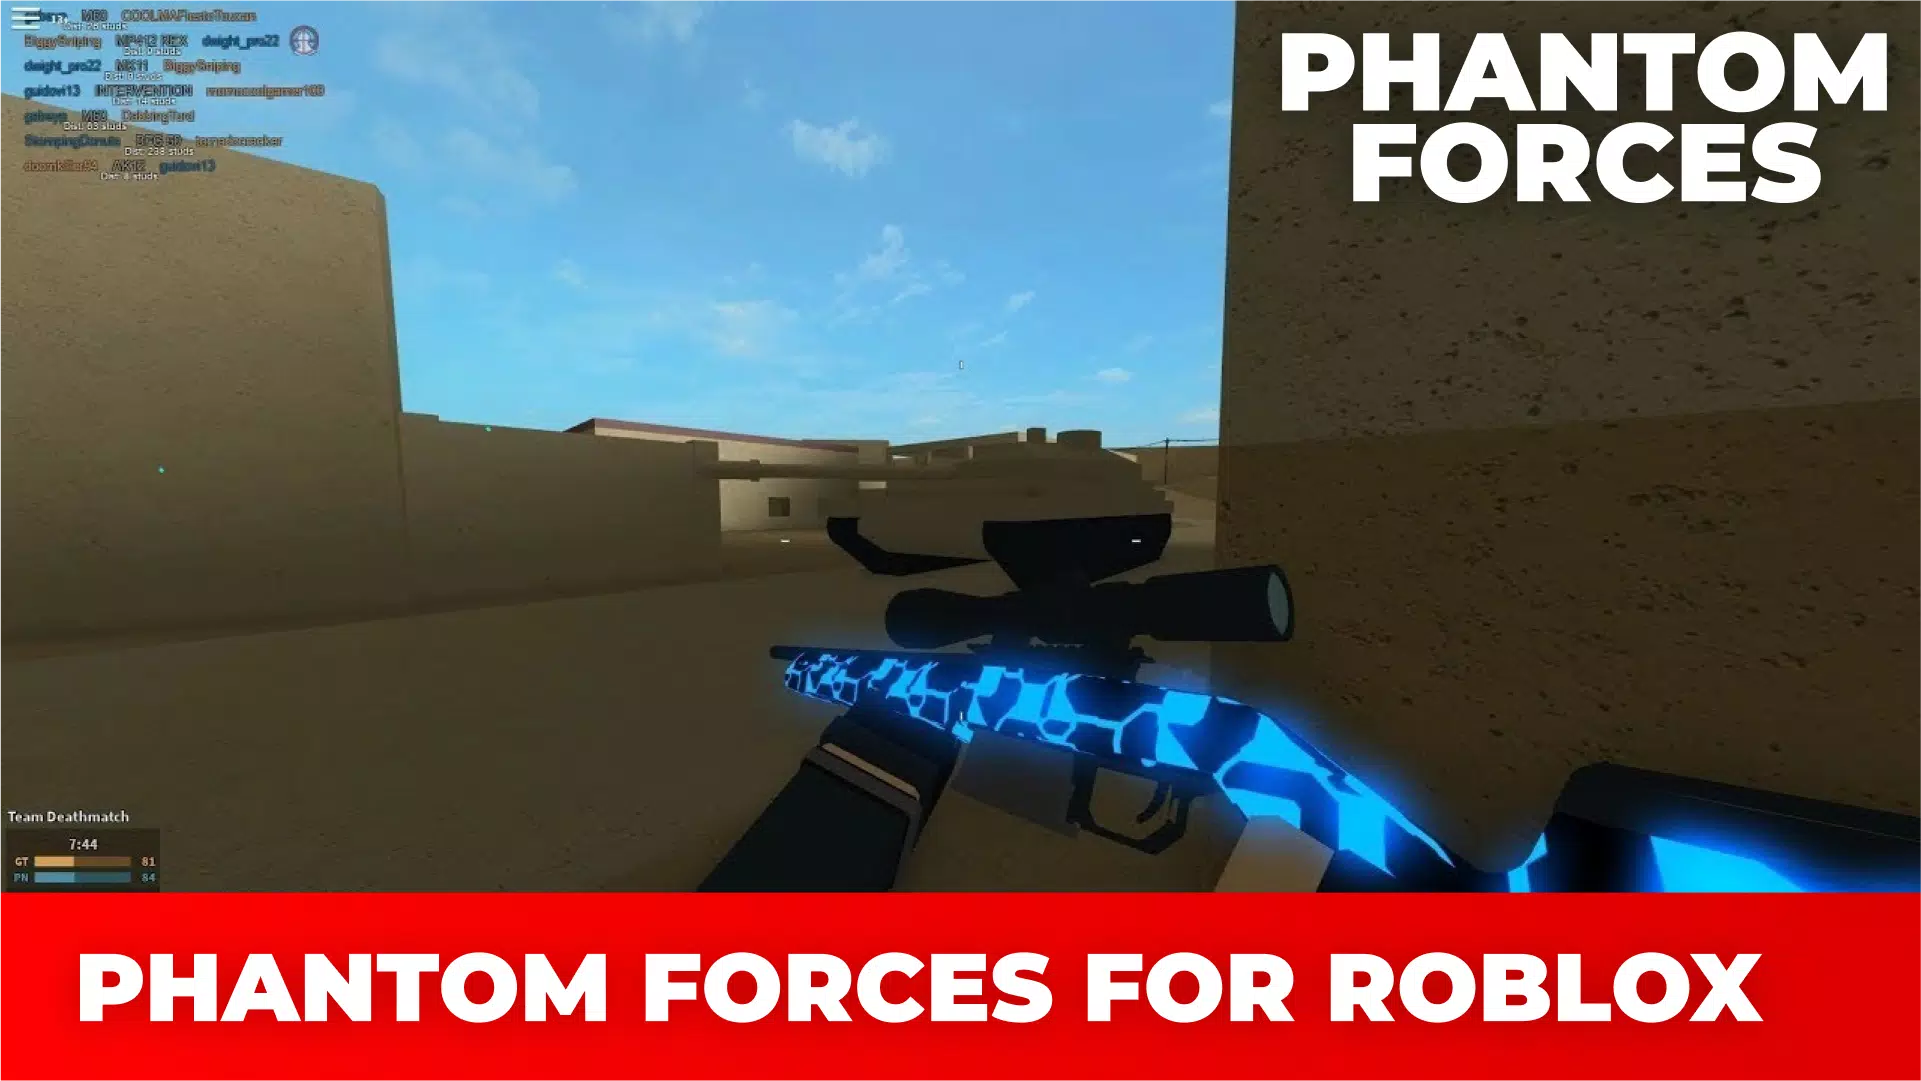 Phantom Forces: Reviews, Features, Pricing & Download